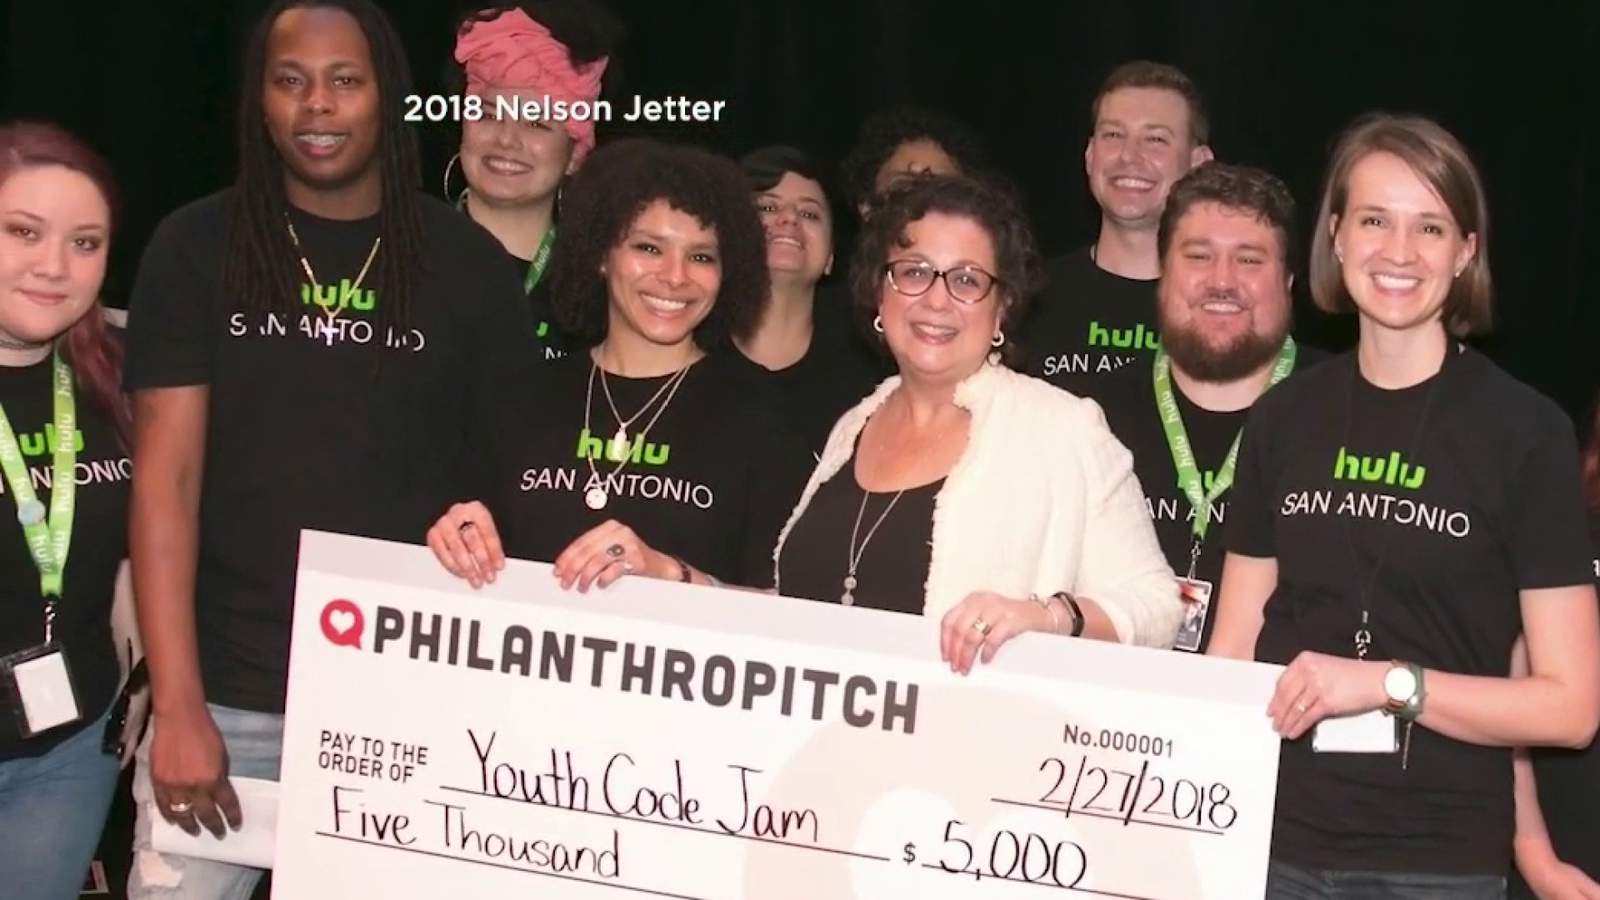 You can be the judge during first virtual event by Philanthropitch